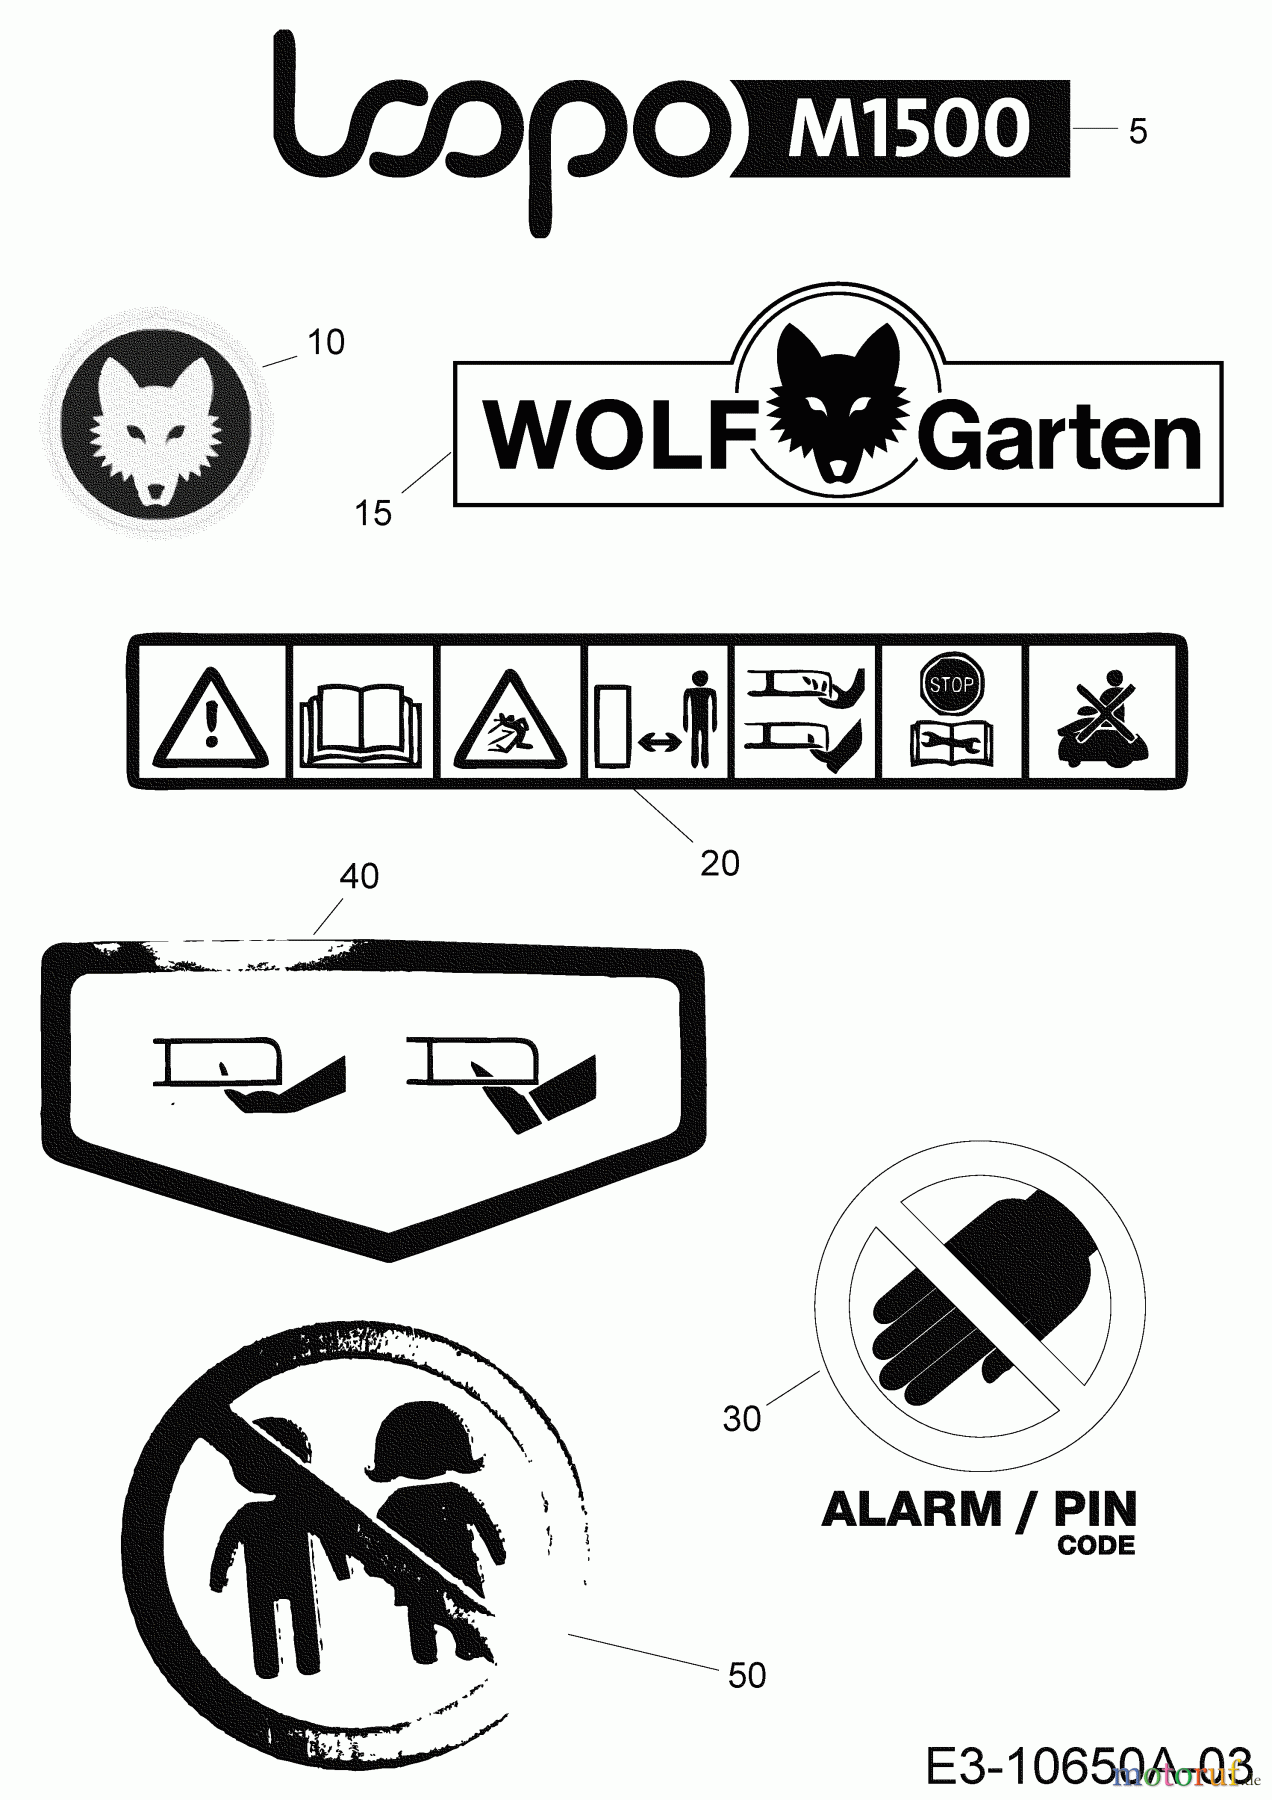  Wolf-Garten Robotic lawn mower Loopo M1500 Connect 22ACDAED650 (2020) Labels